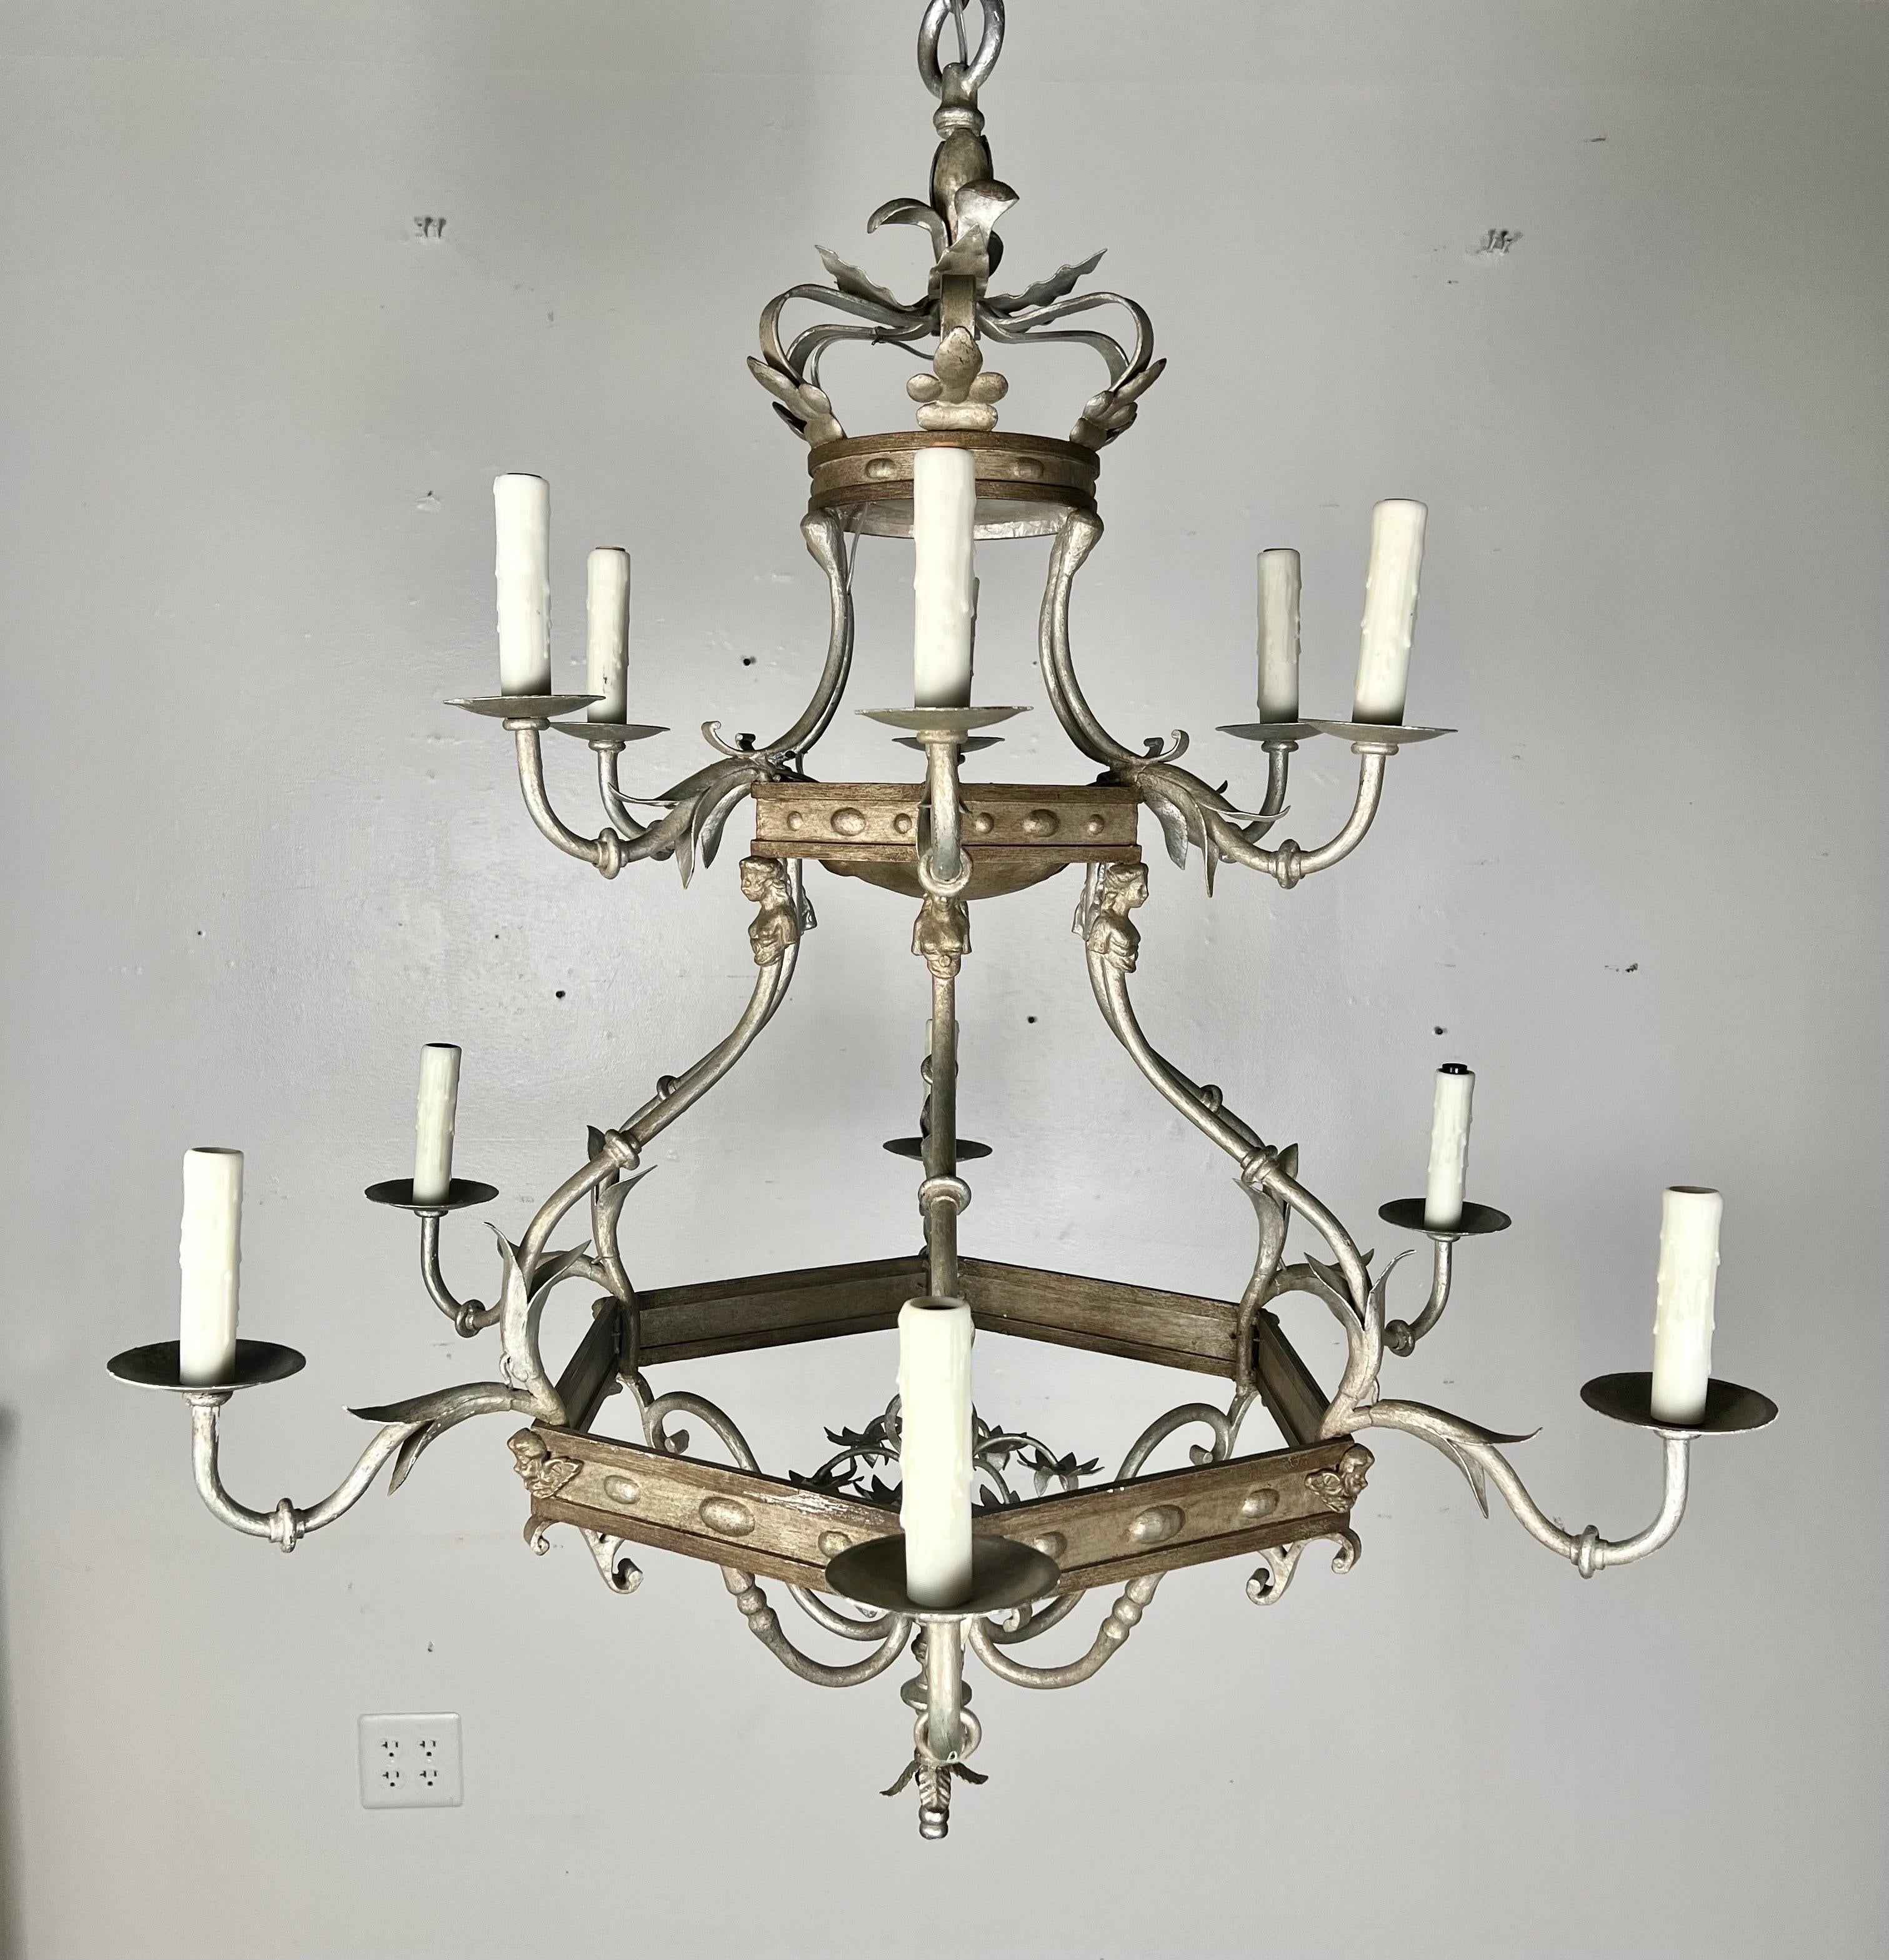 Monumental size 12-light, two-tiered silvered chandelier.  The chandelier is adorned with a crown on top and cherub faces throughout.  The fixture is newly rewired and includes chain & canopy.